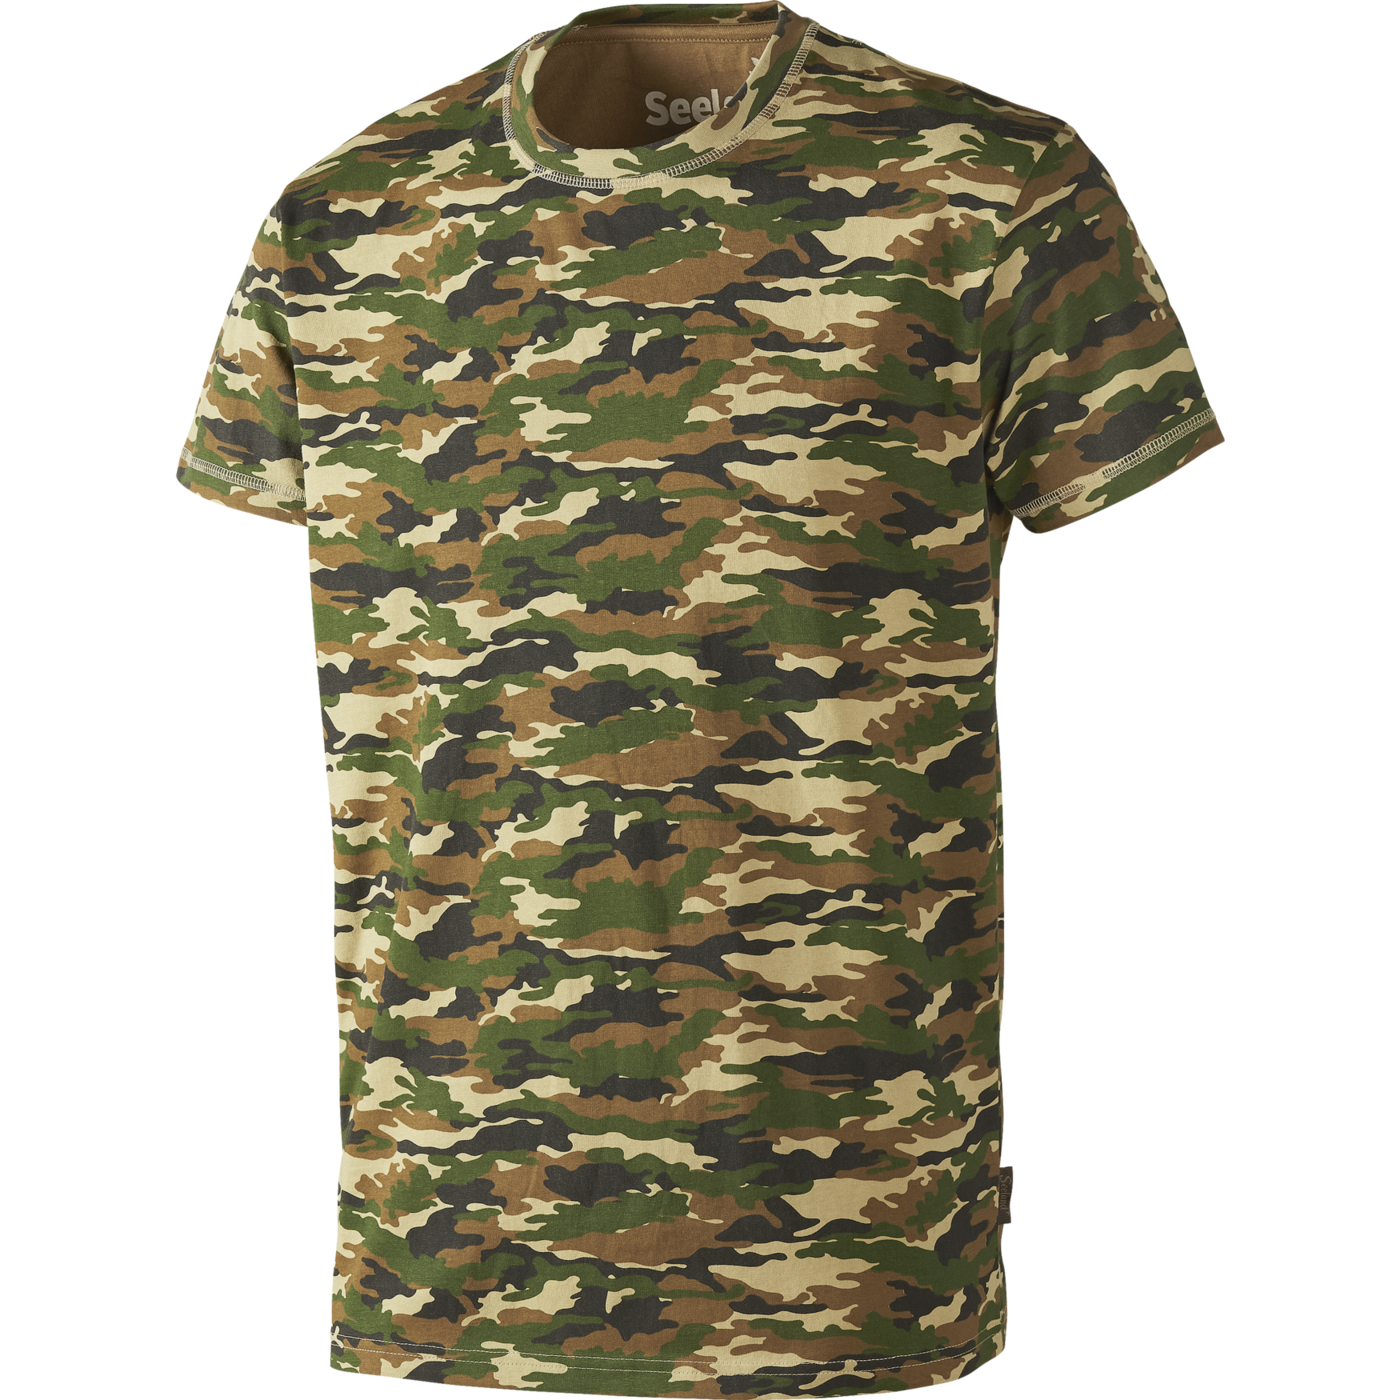 Speckled S/S T-shirt - camo thumbnail